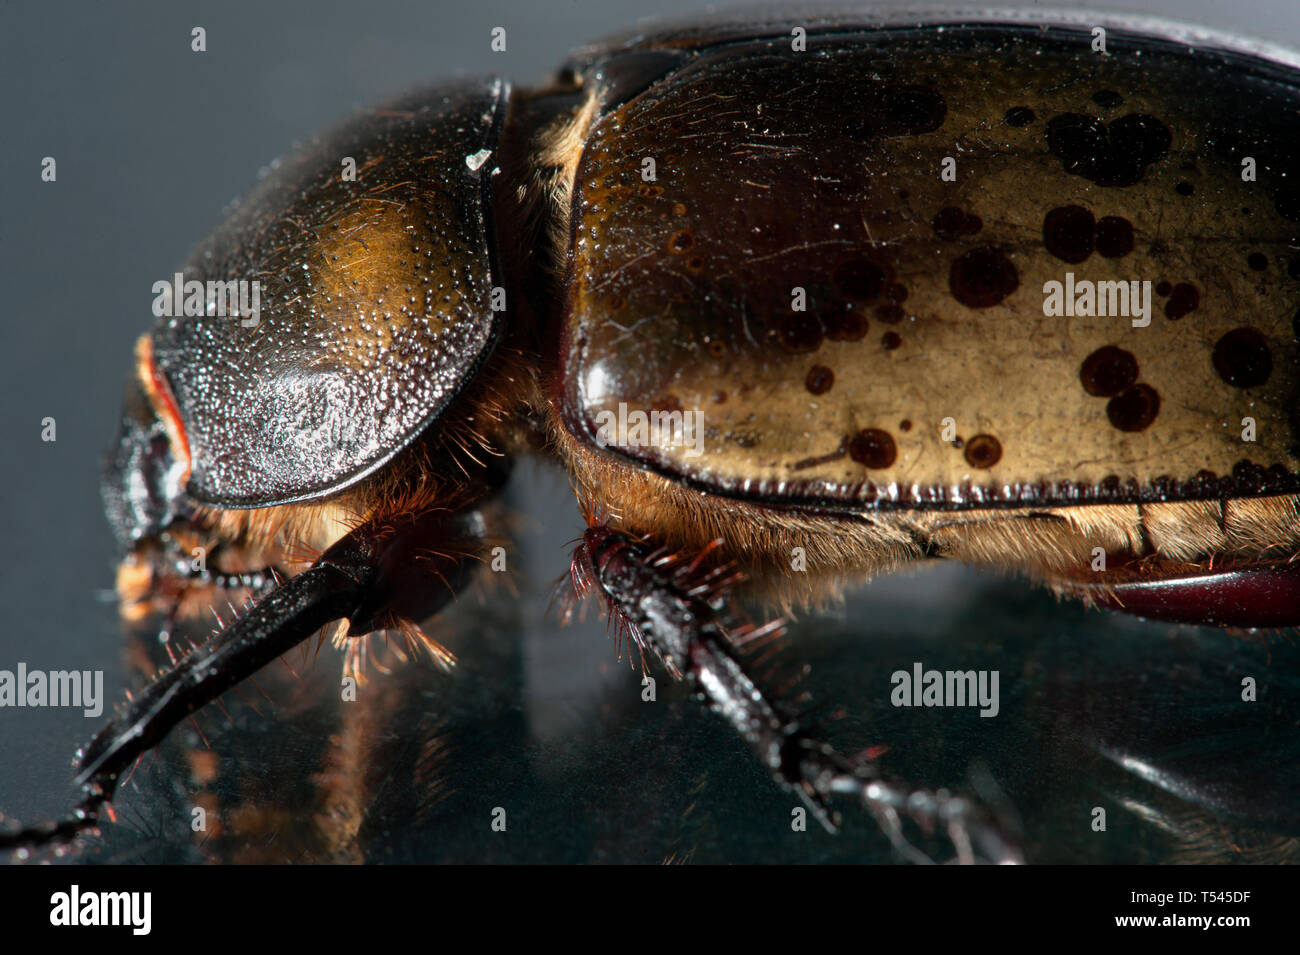 Macro photograph showing detail of a female Eastern Hercules Beetle. Stock Photo